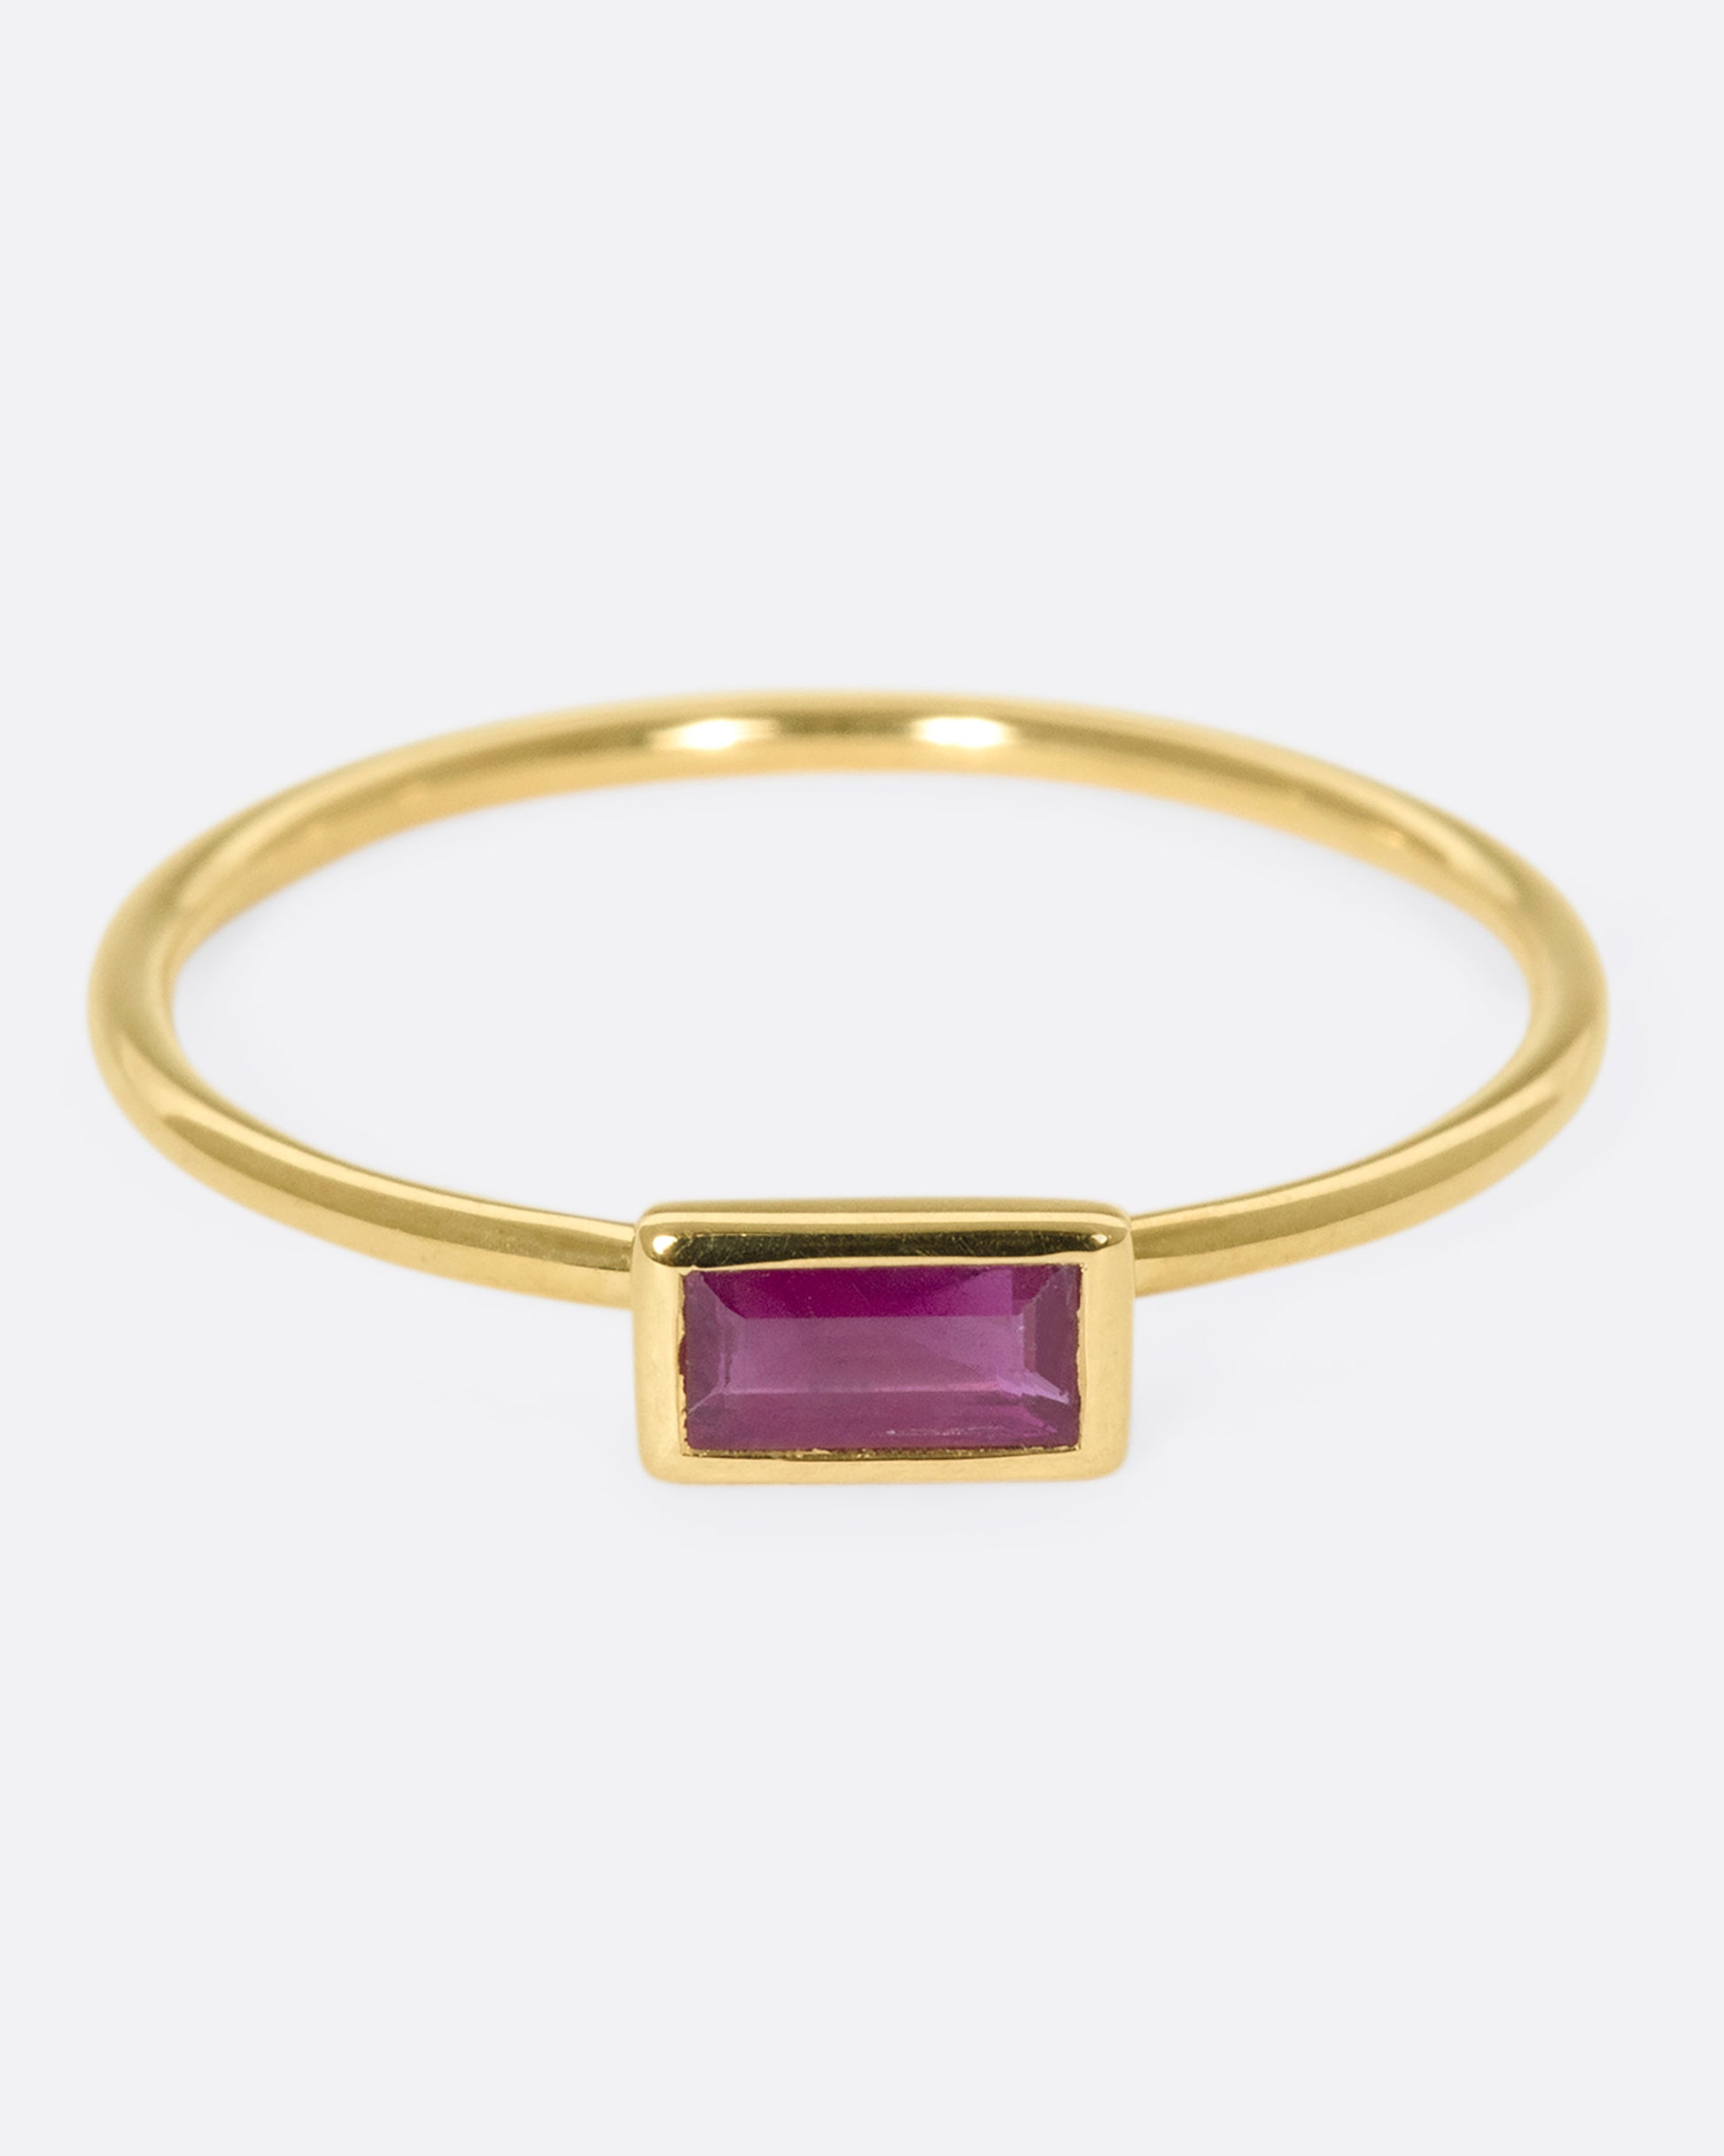 This horizontal ruby baguette set in 9k gold is a stunning stacker, adding color, sparkle, and dimensional interest without bringing any bulk.